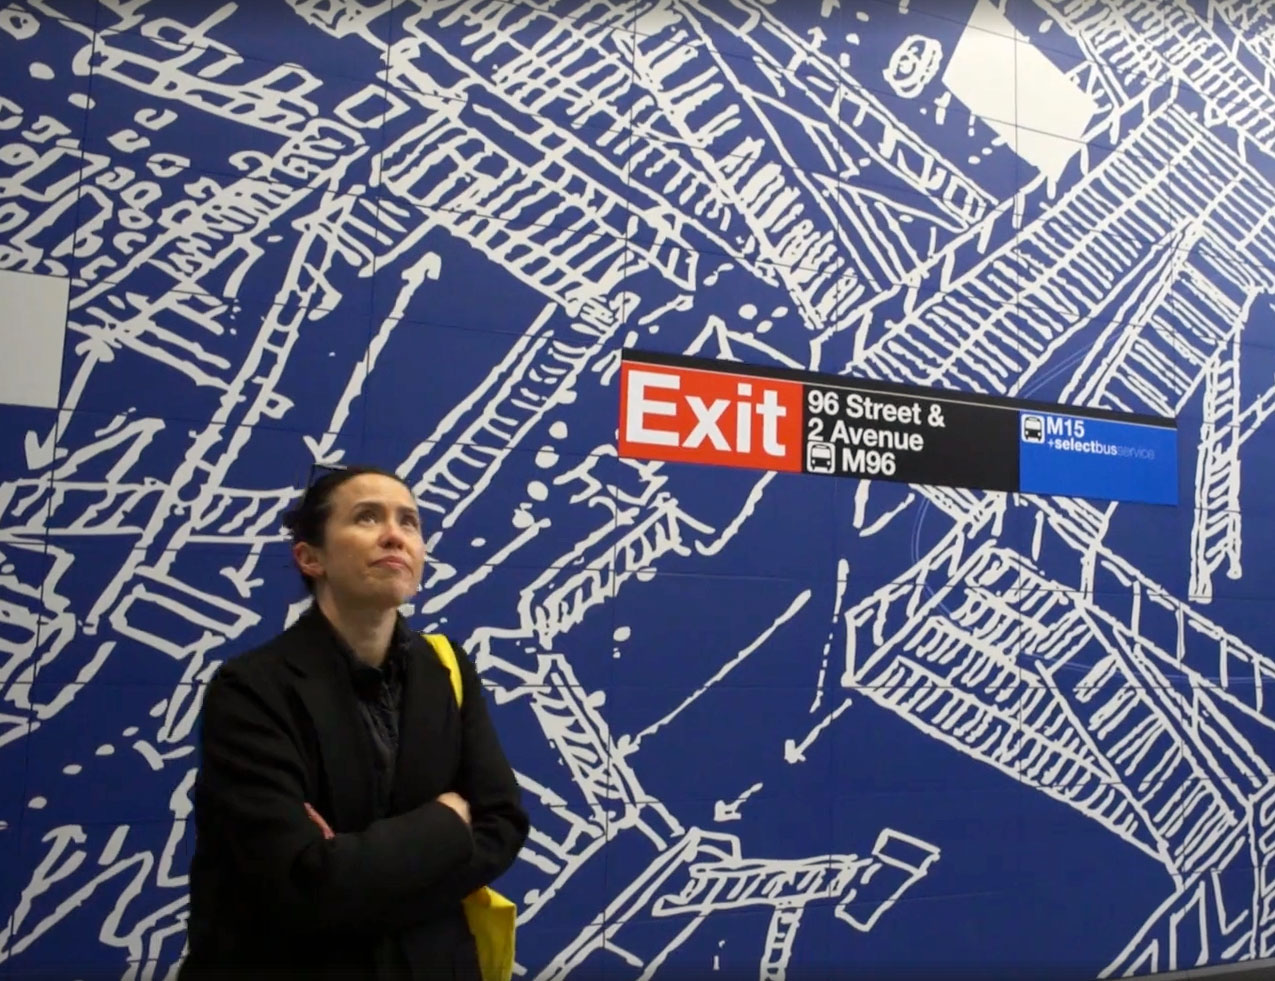 Sarah Sze at the 96th Street St 2nd Avenue Station. Image courtesy of art21.org.